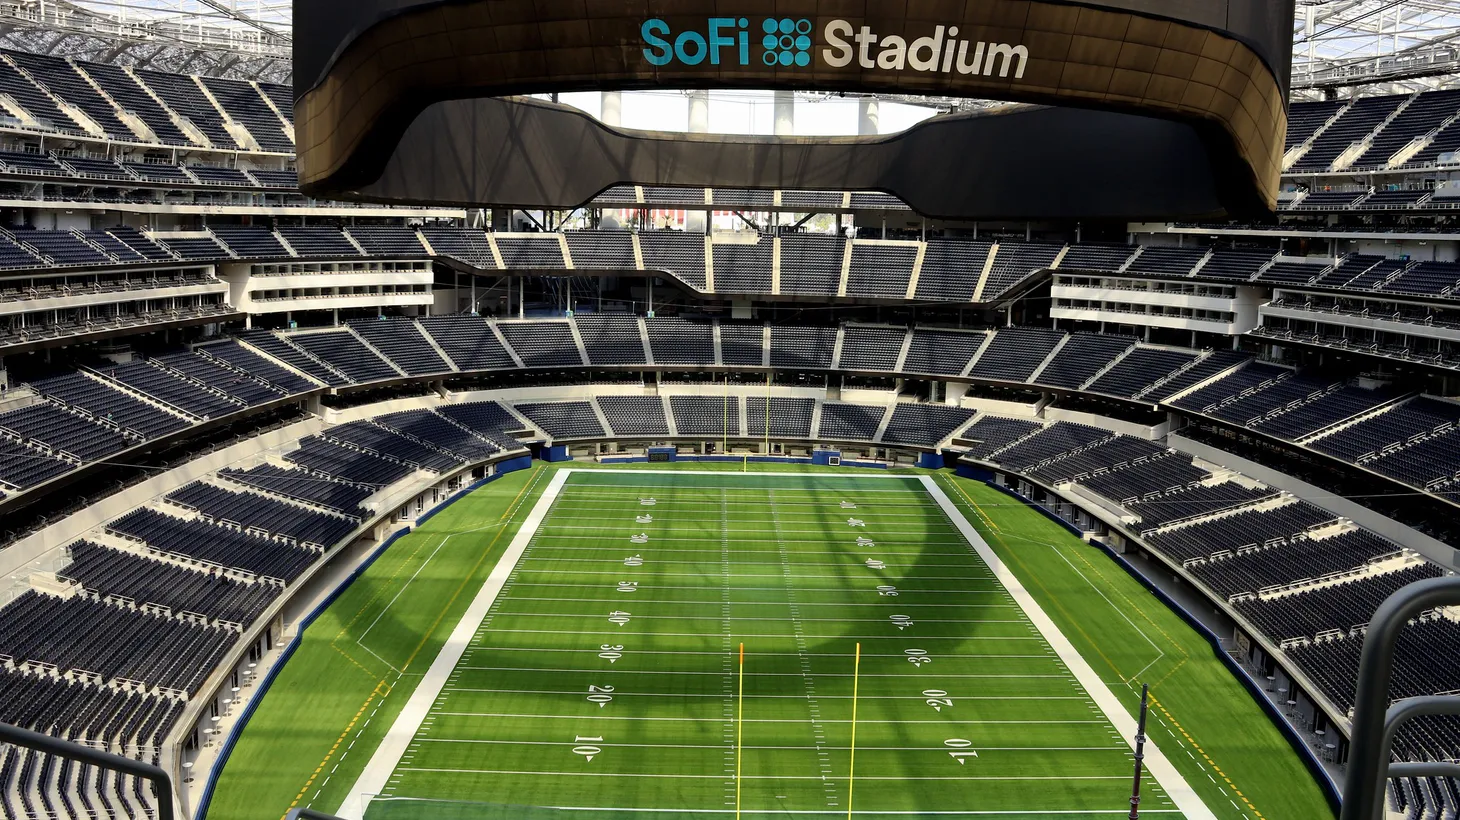 Op-ed: With its $80 parking, SoFi is no touchdown for Super Bowl fan